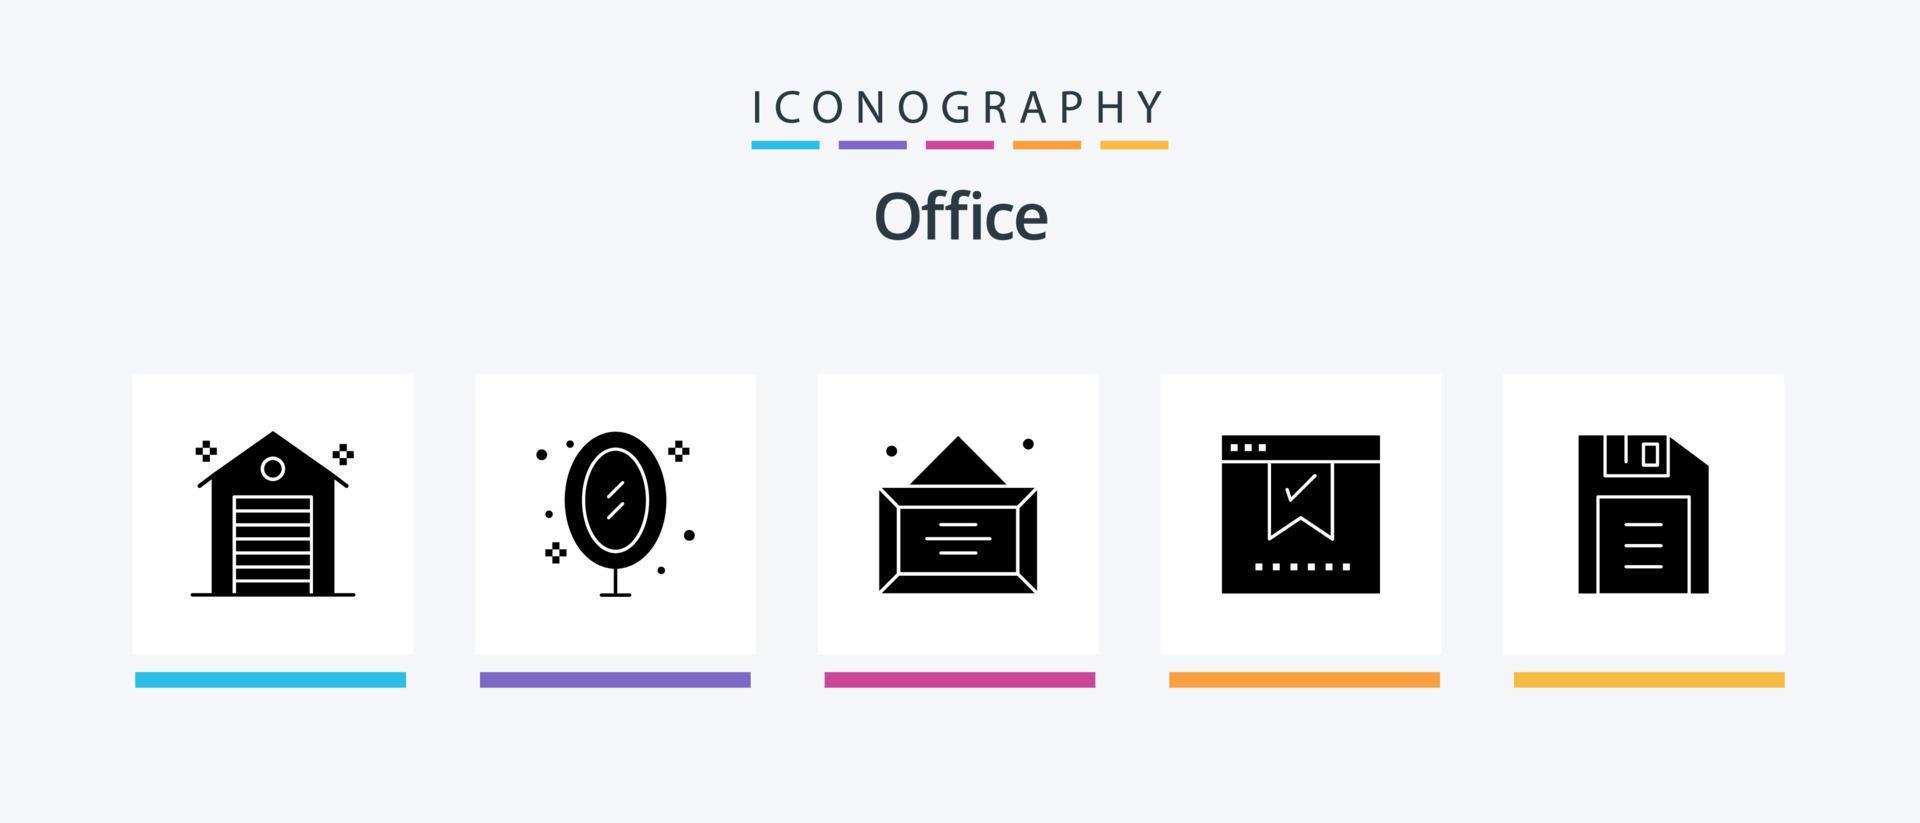 Office Glyph 5 Icon Pack Including okay. good. reflection. check. office. Creative Icons Design vector